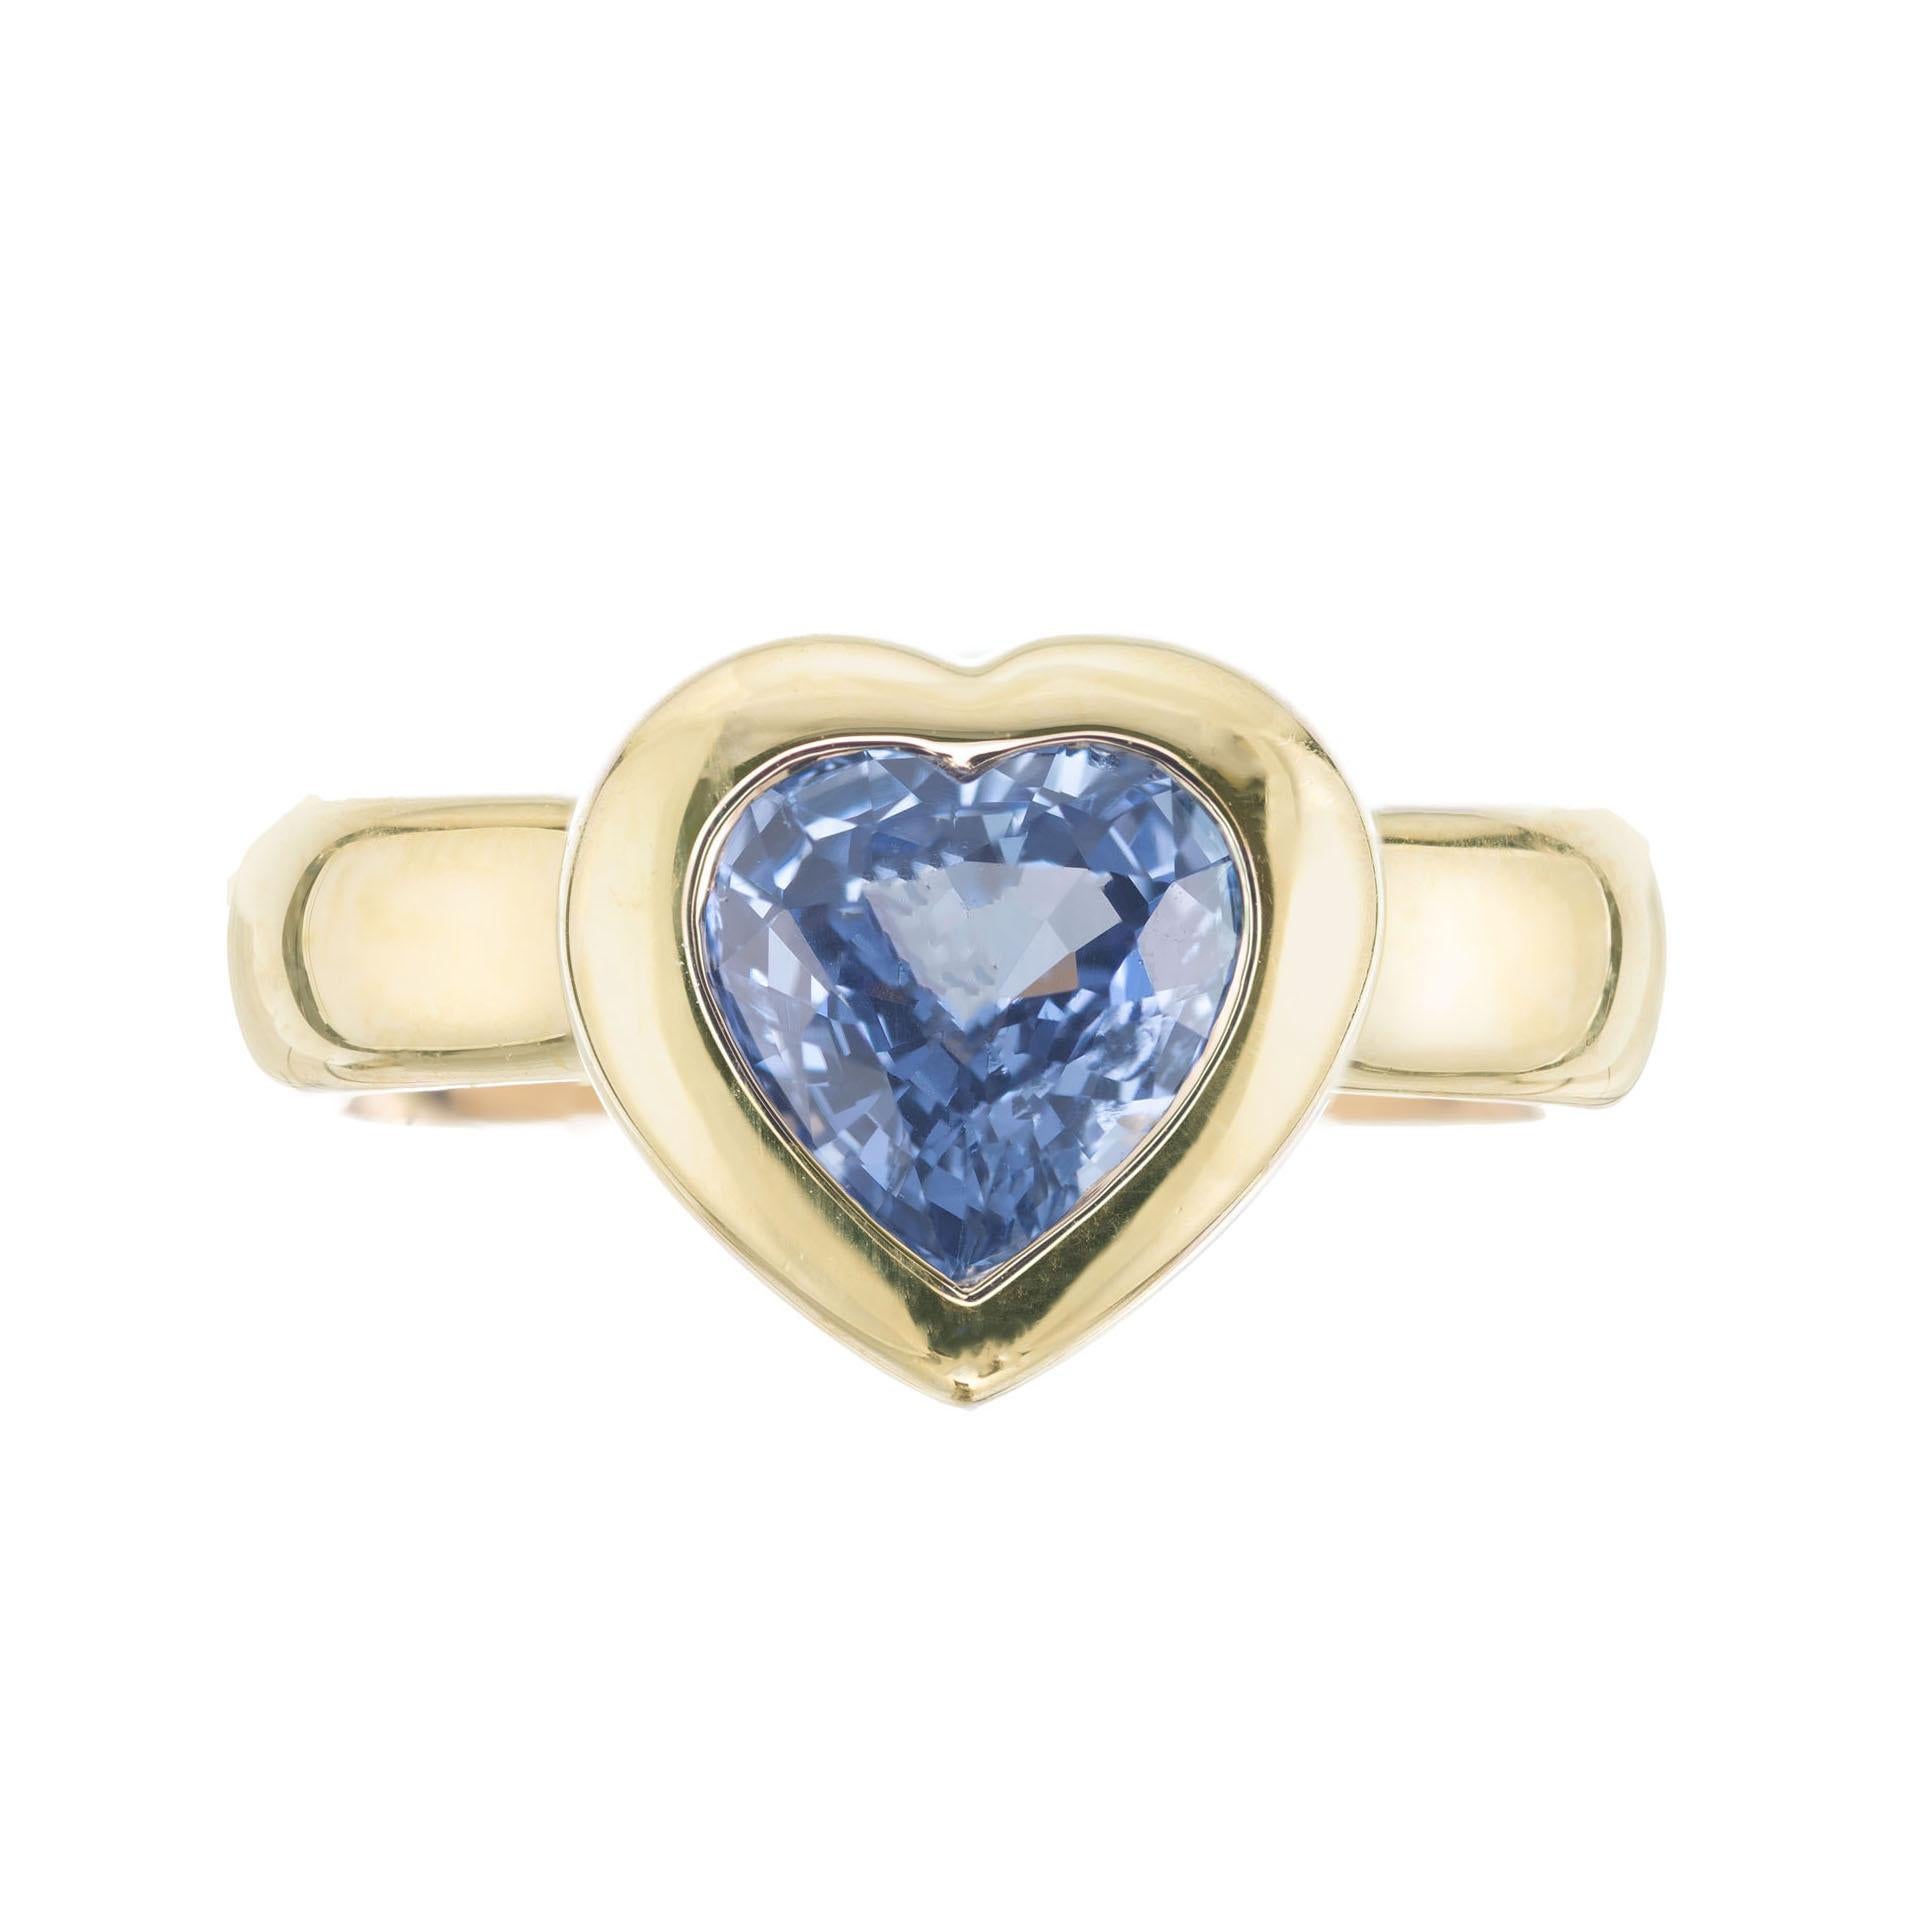 Tiffany & Co 1.50 carat heart shaped periwinkle blue sapphire 18k yellow gold ring.

1 heart shaped medium blue sapphire, approx. 1.50ct
Size 5 and sizable 
18k yellow gold 
Stamped: 750 Italy
Hallmark: Tiffany & Co
7.8 grams
Width at top: